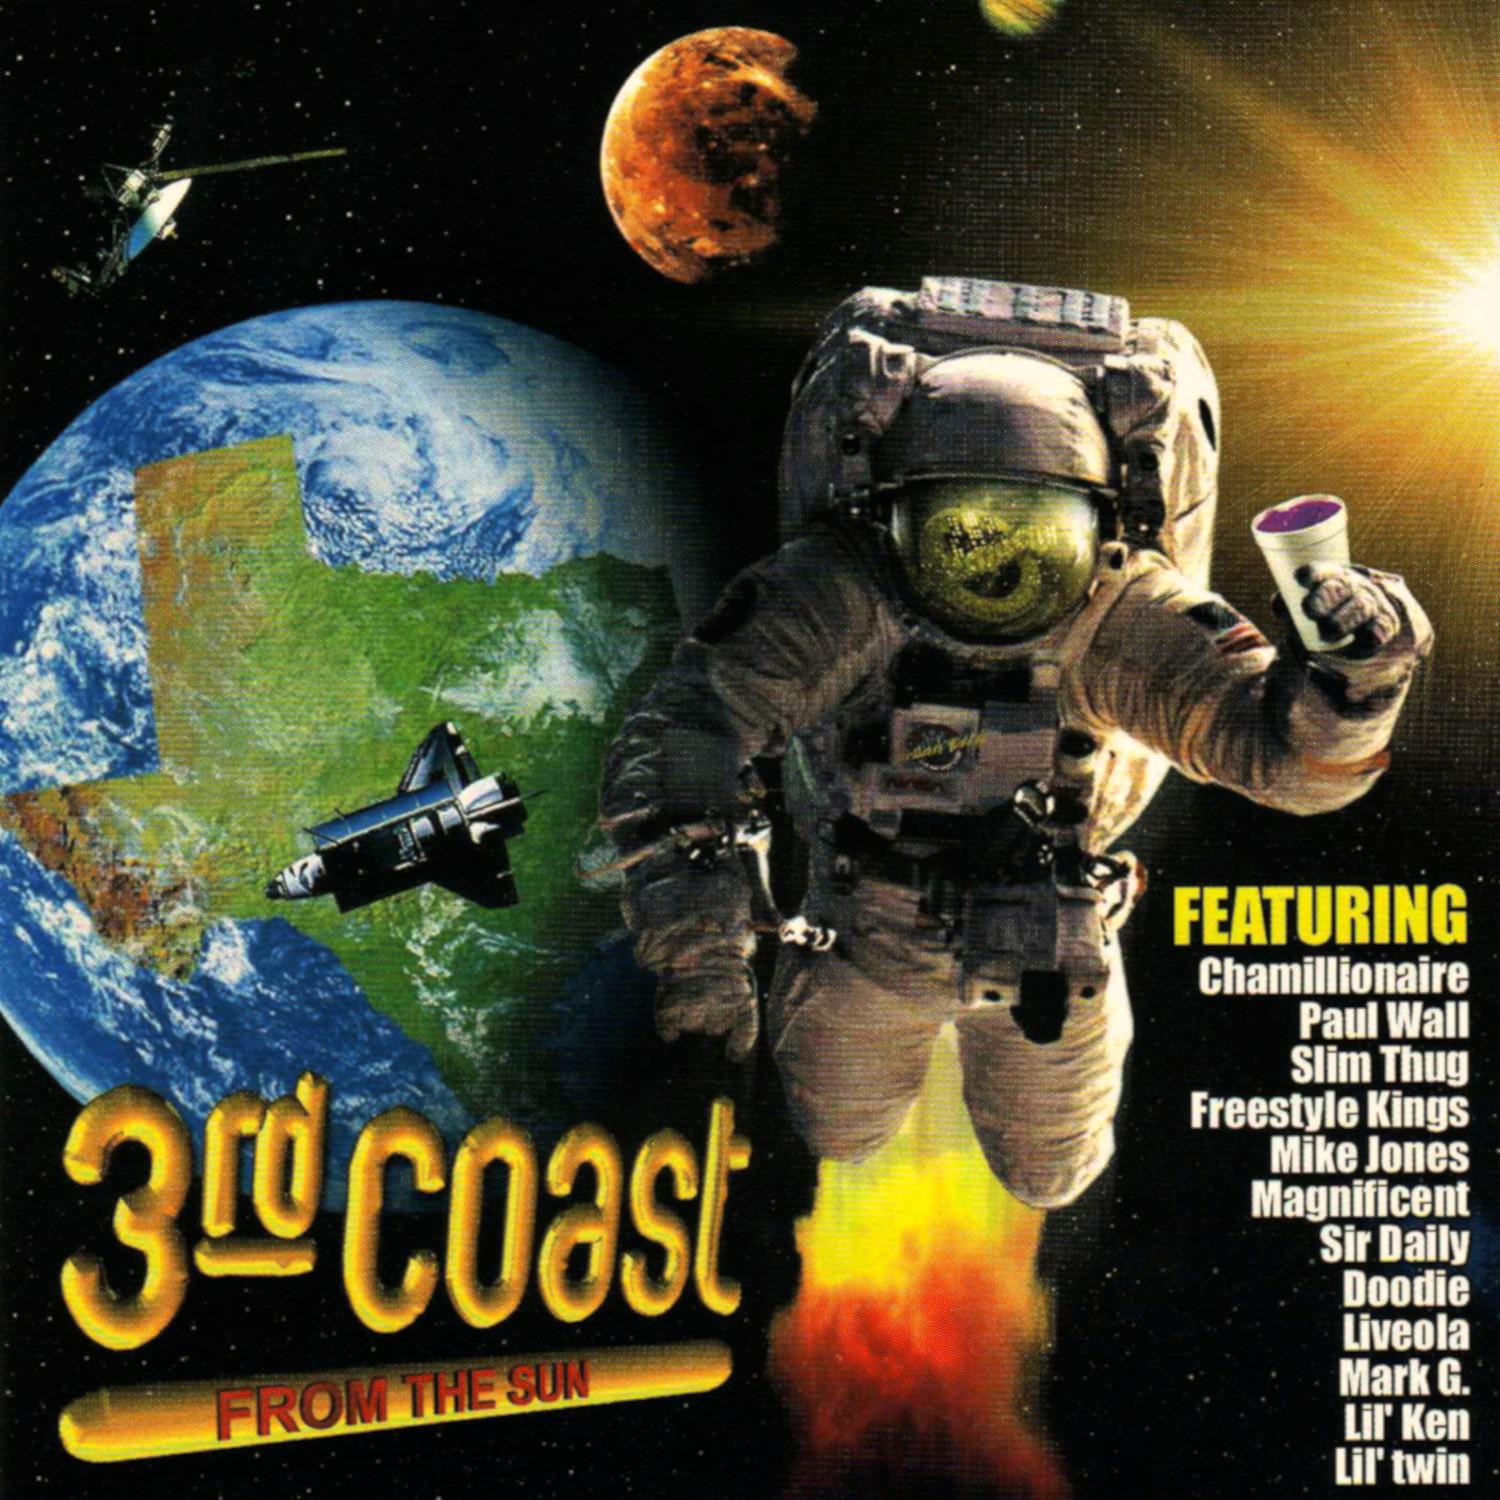 3rd Coast from the Sun (3rd Degree Ent. Presents)